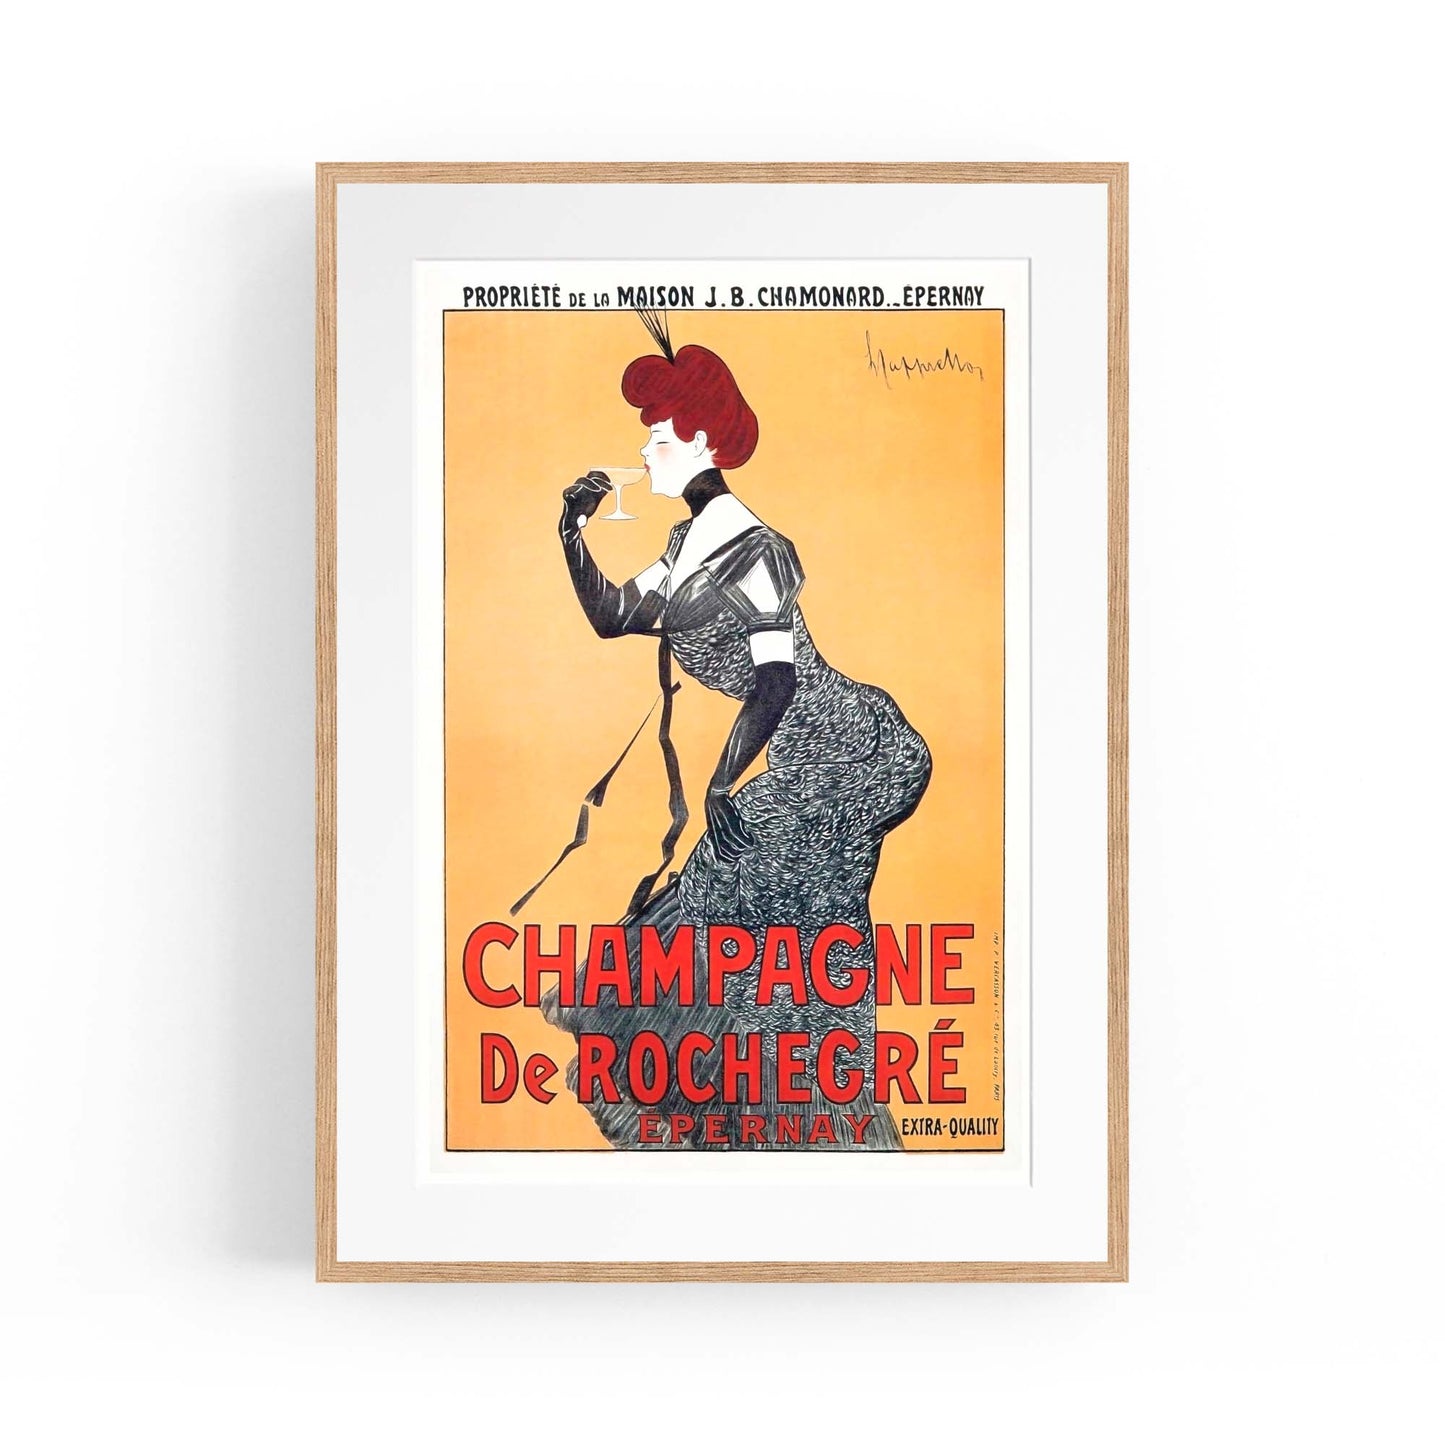 French Champagne Vintage Advert Wall Art - The Affordable Art Company